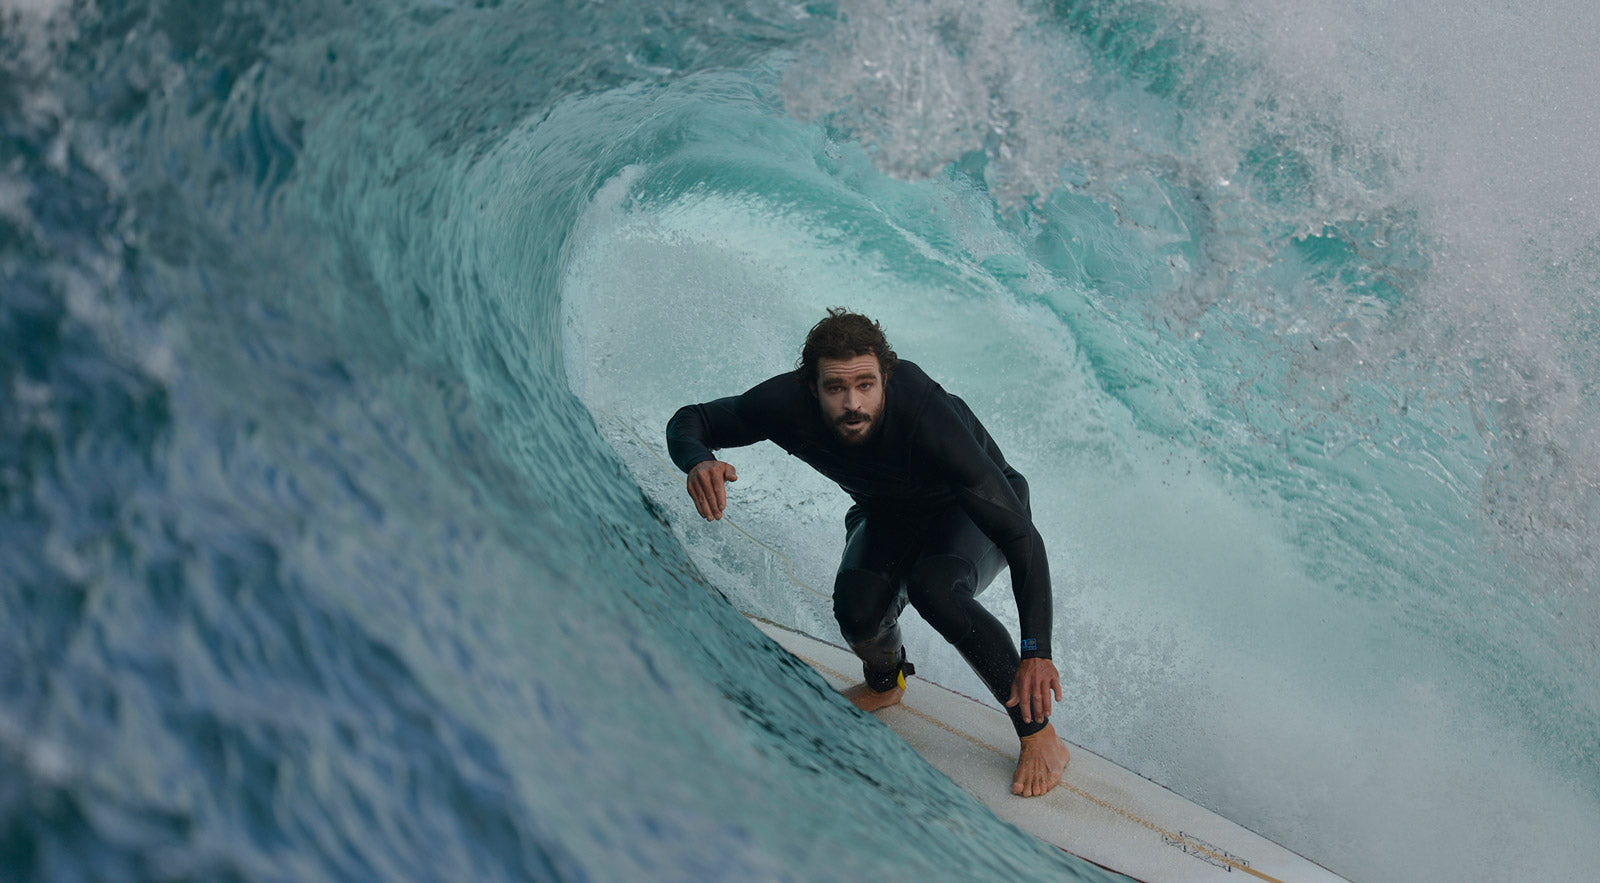 A former competitor on the elite World Championship Tour, Heath Joske has a different focus these days—keeping Equinor’s oil rigs out of the Great Australian Bight, the unspoiled ocean wilderness where he lives, fishes and surfs. Photo Rich Richards